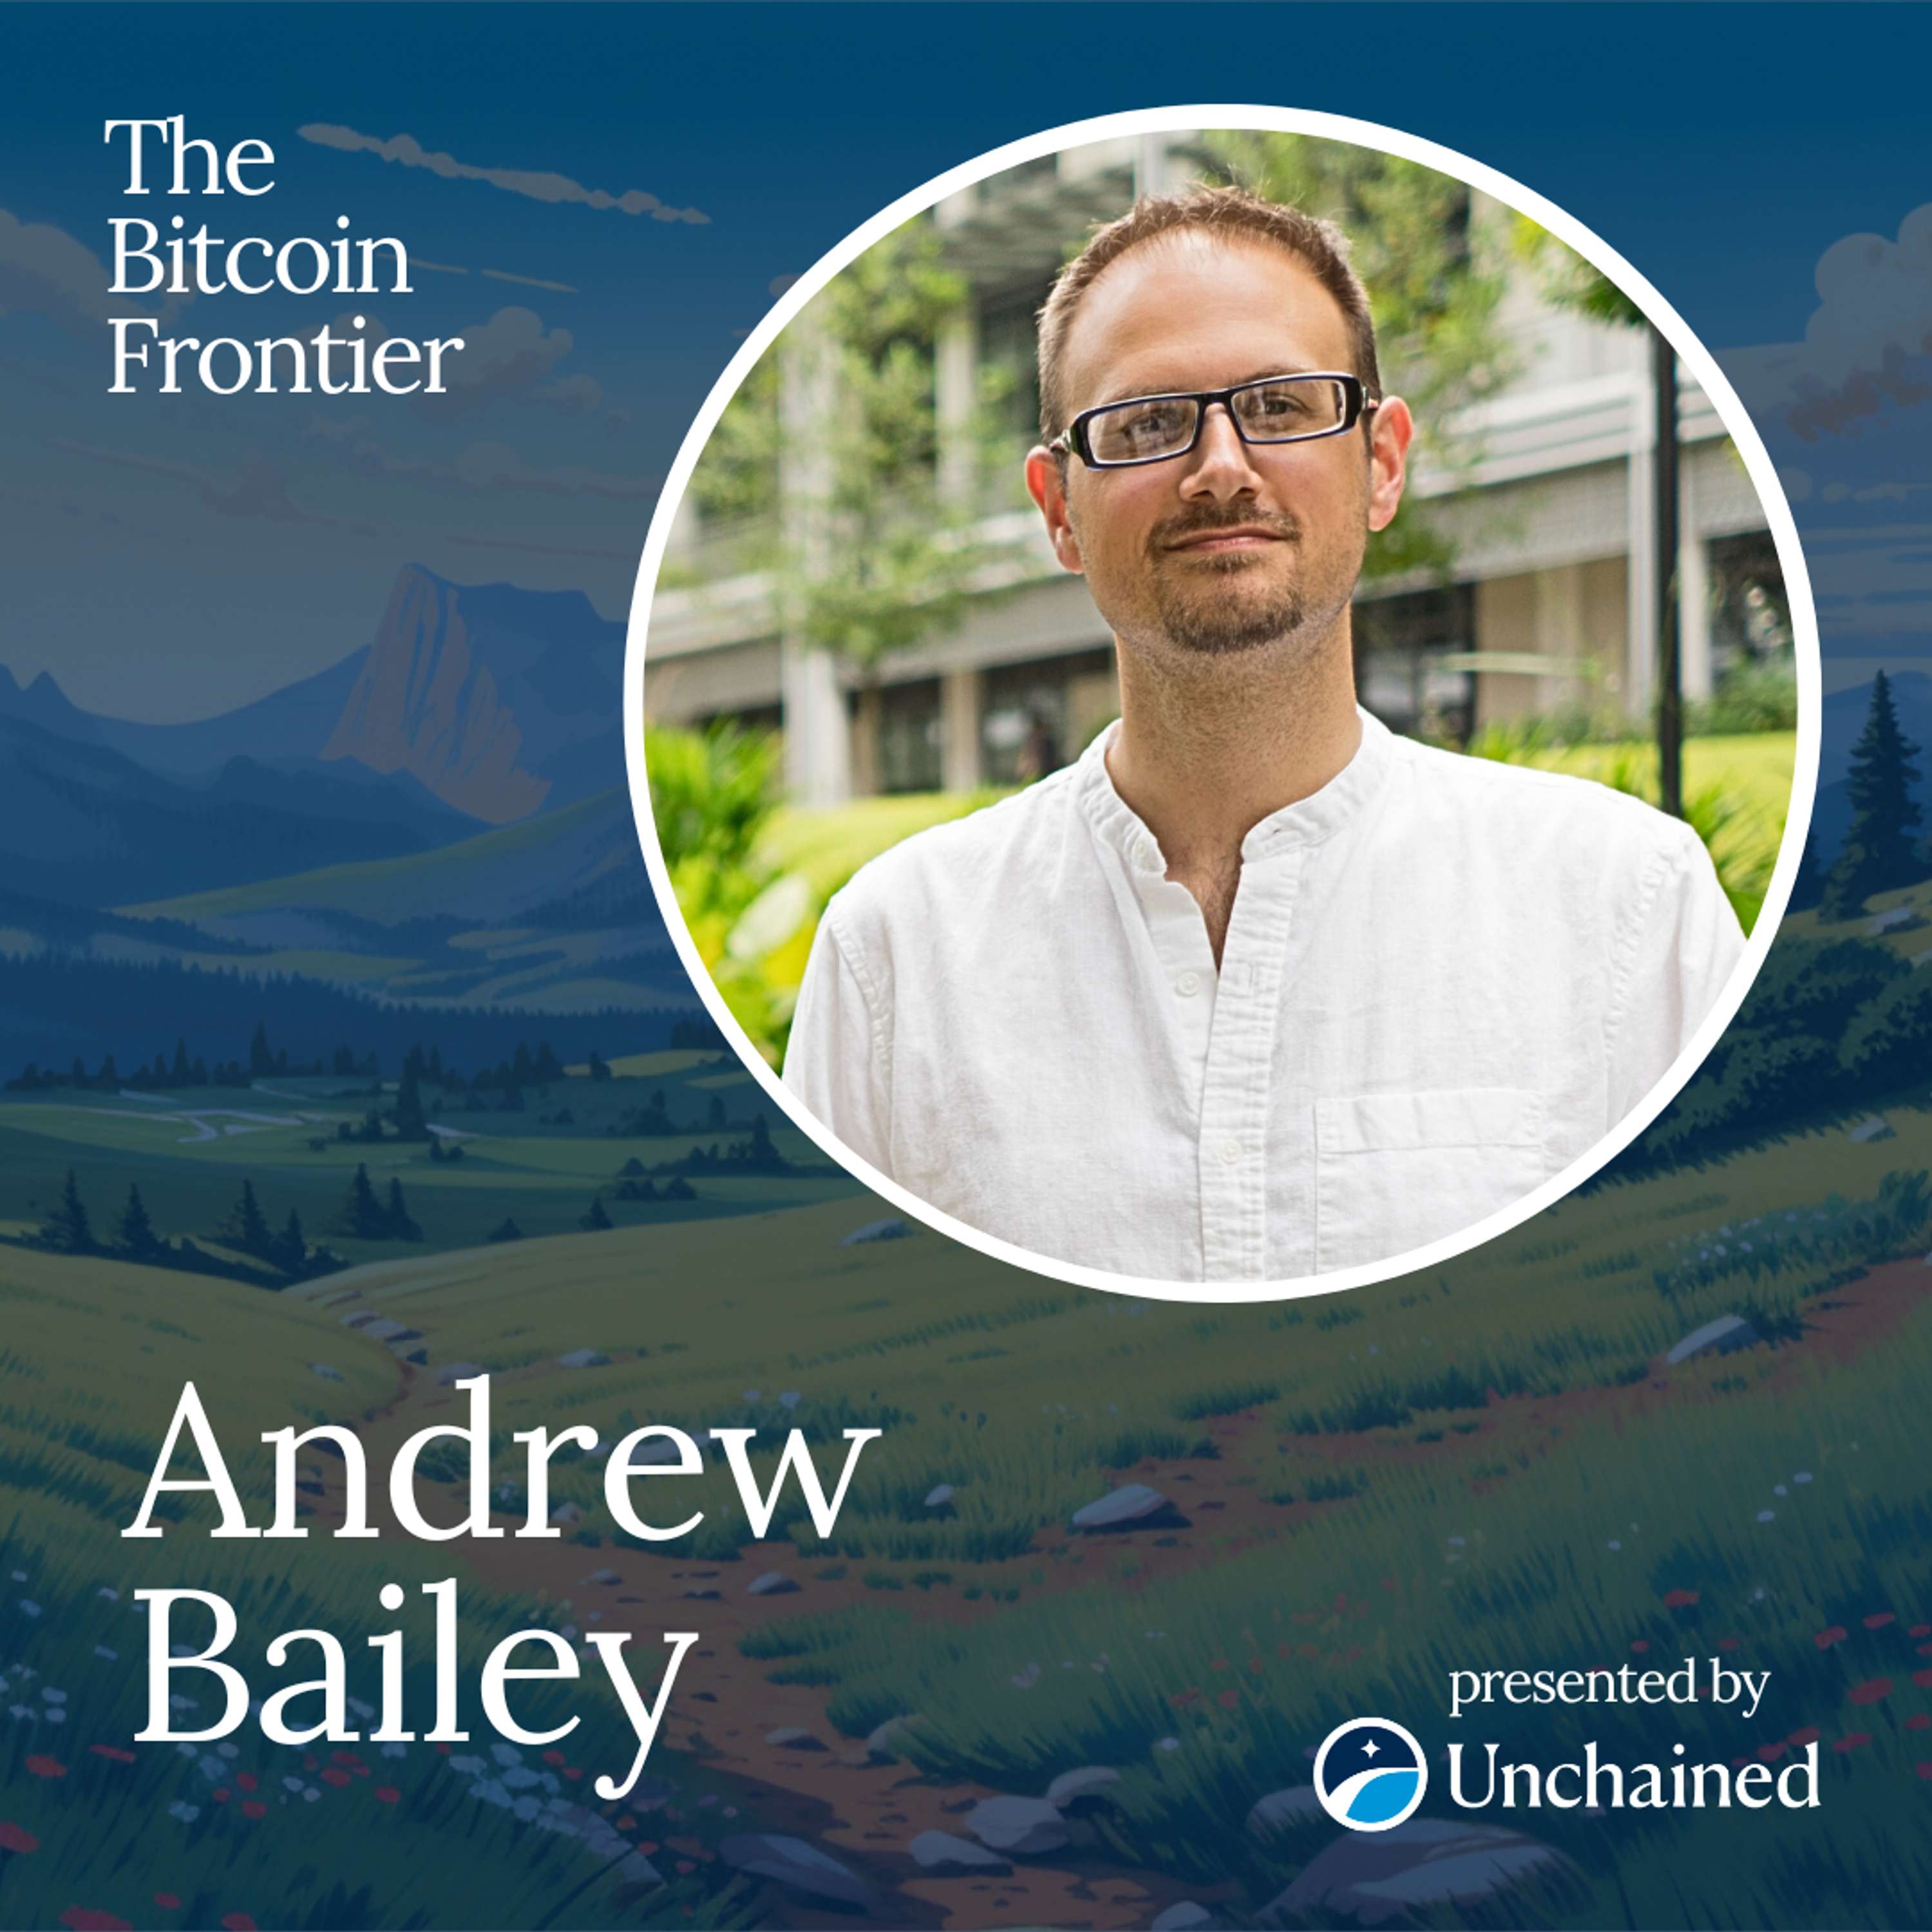 Bitcoin is valuable because it’s censorship resistant with Andrew Bailey